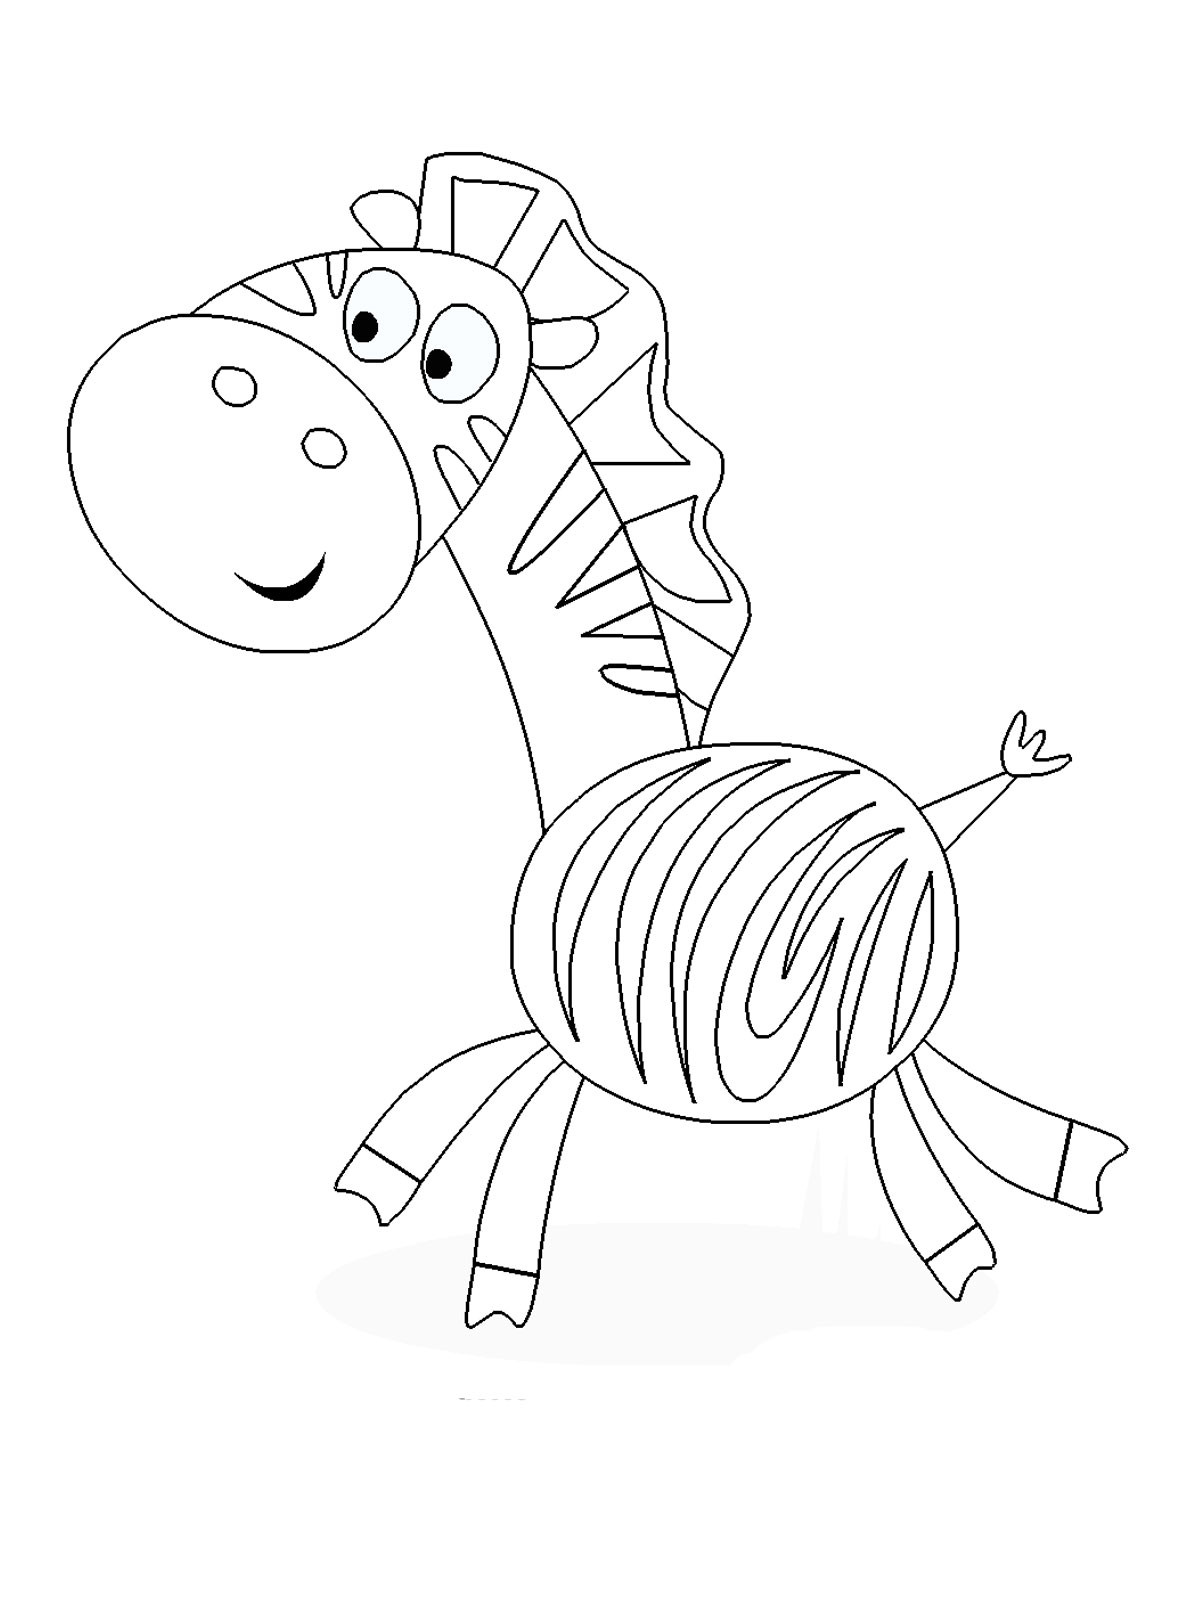 Coloring Pages Toddlers
 Printable coloring pages for kids